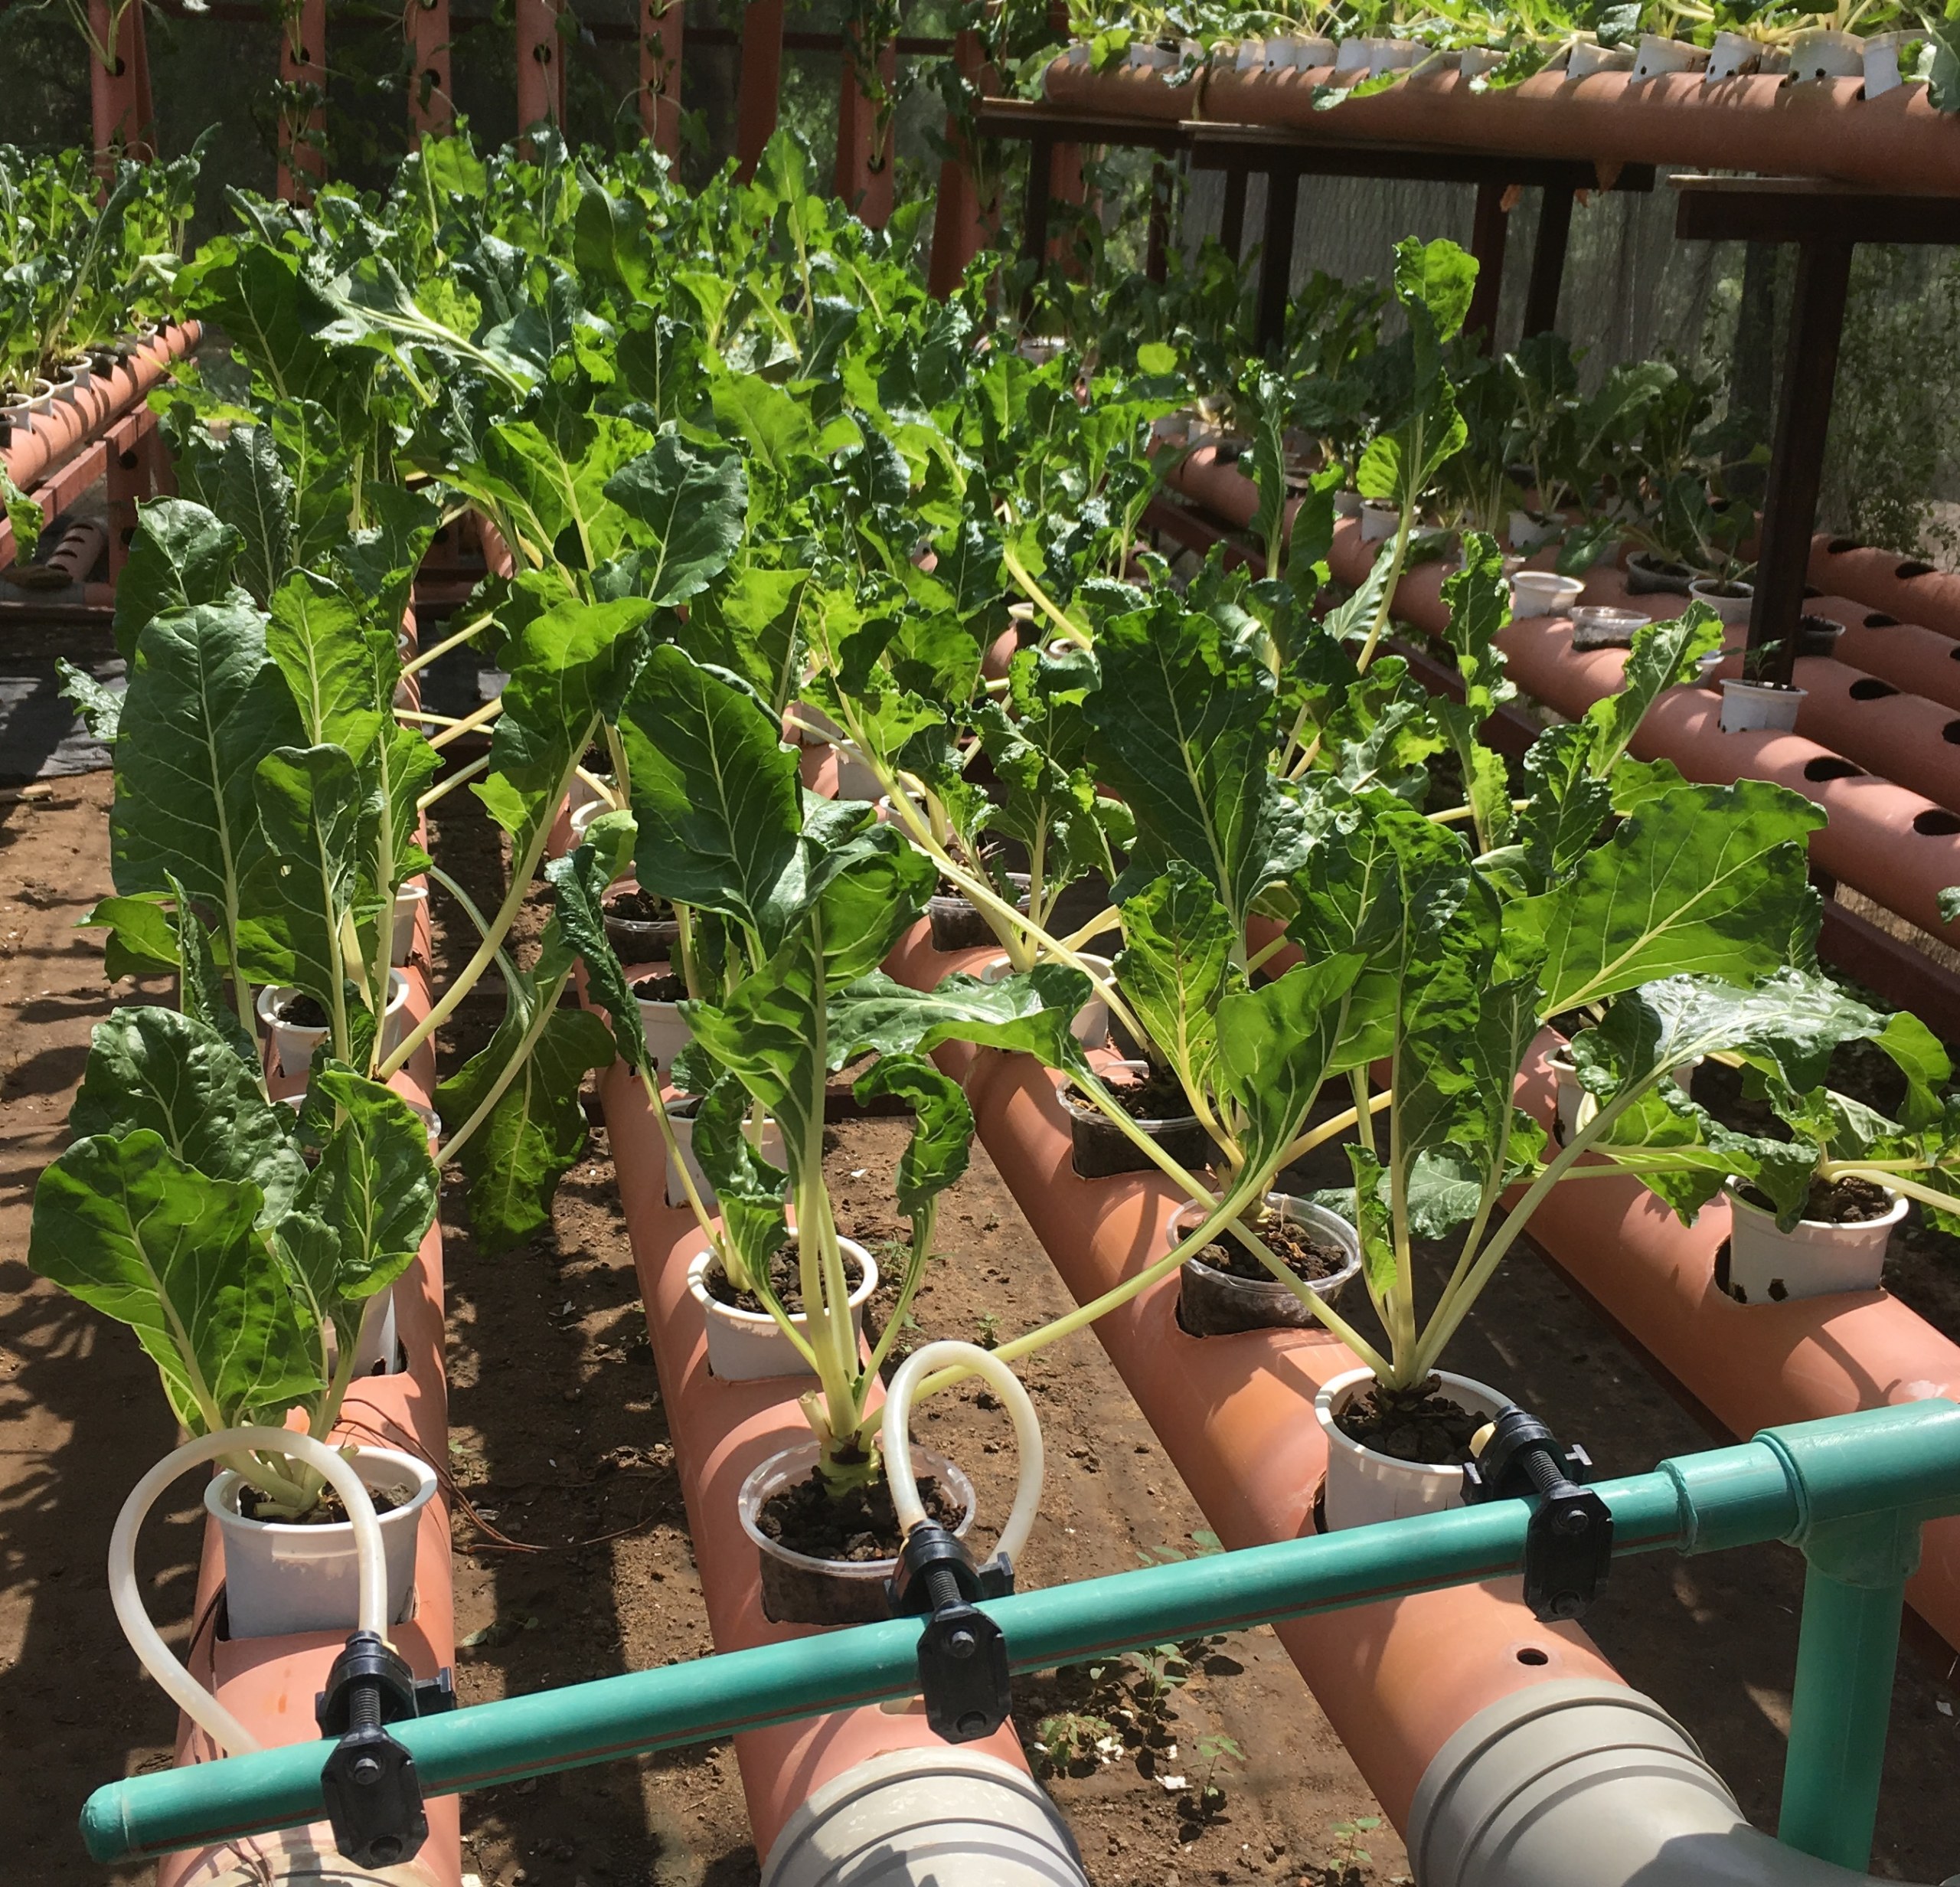 New TBI project aims to bring hydroponic farming to local communities